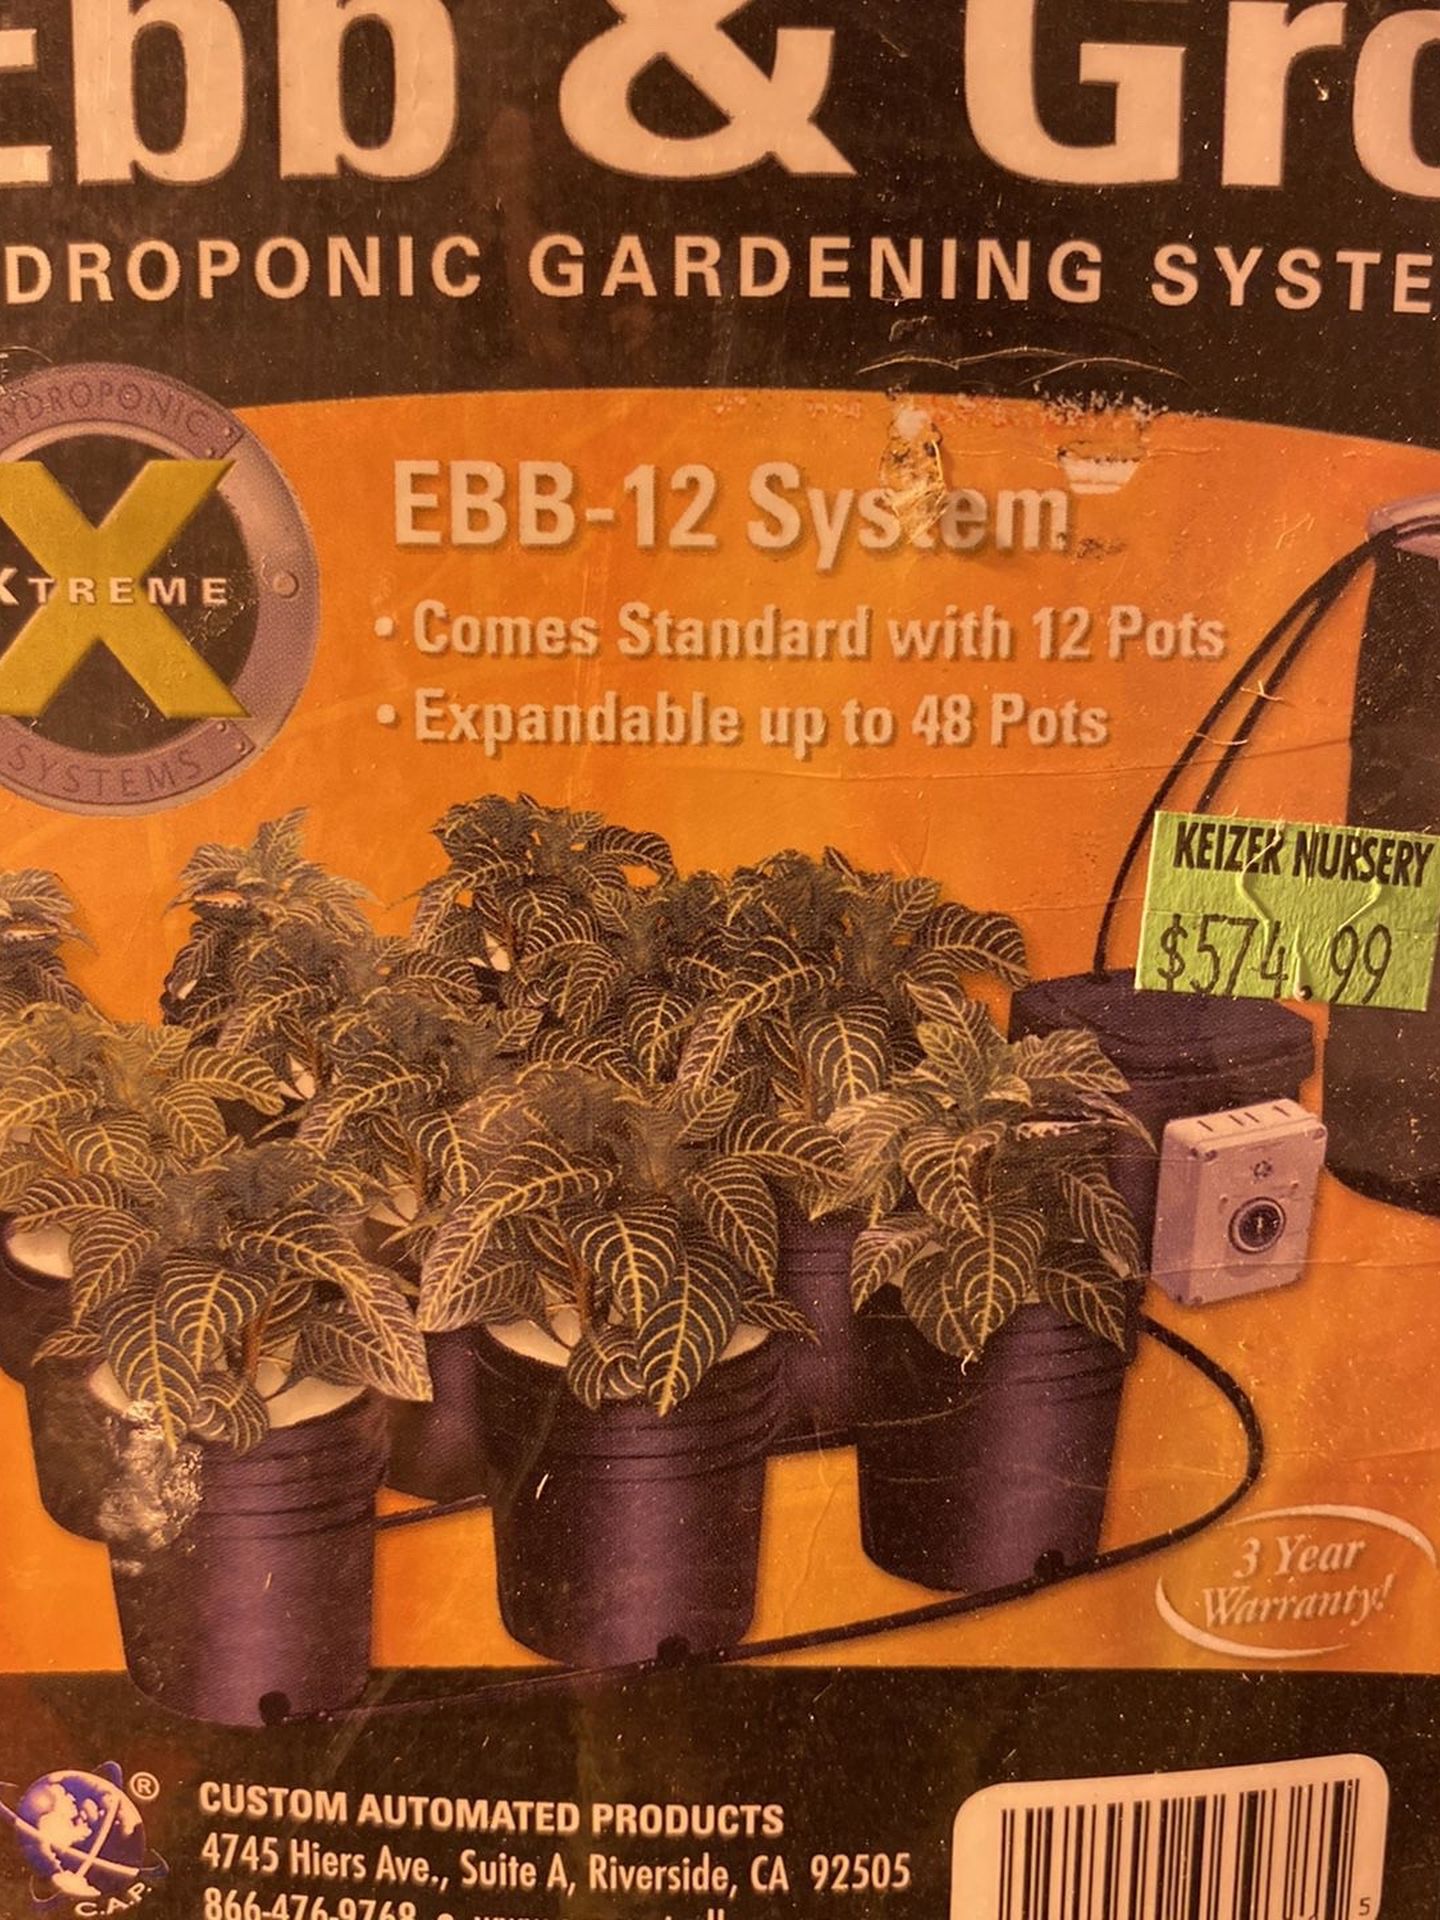 Ebb and gro hydroponic gardening system